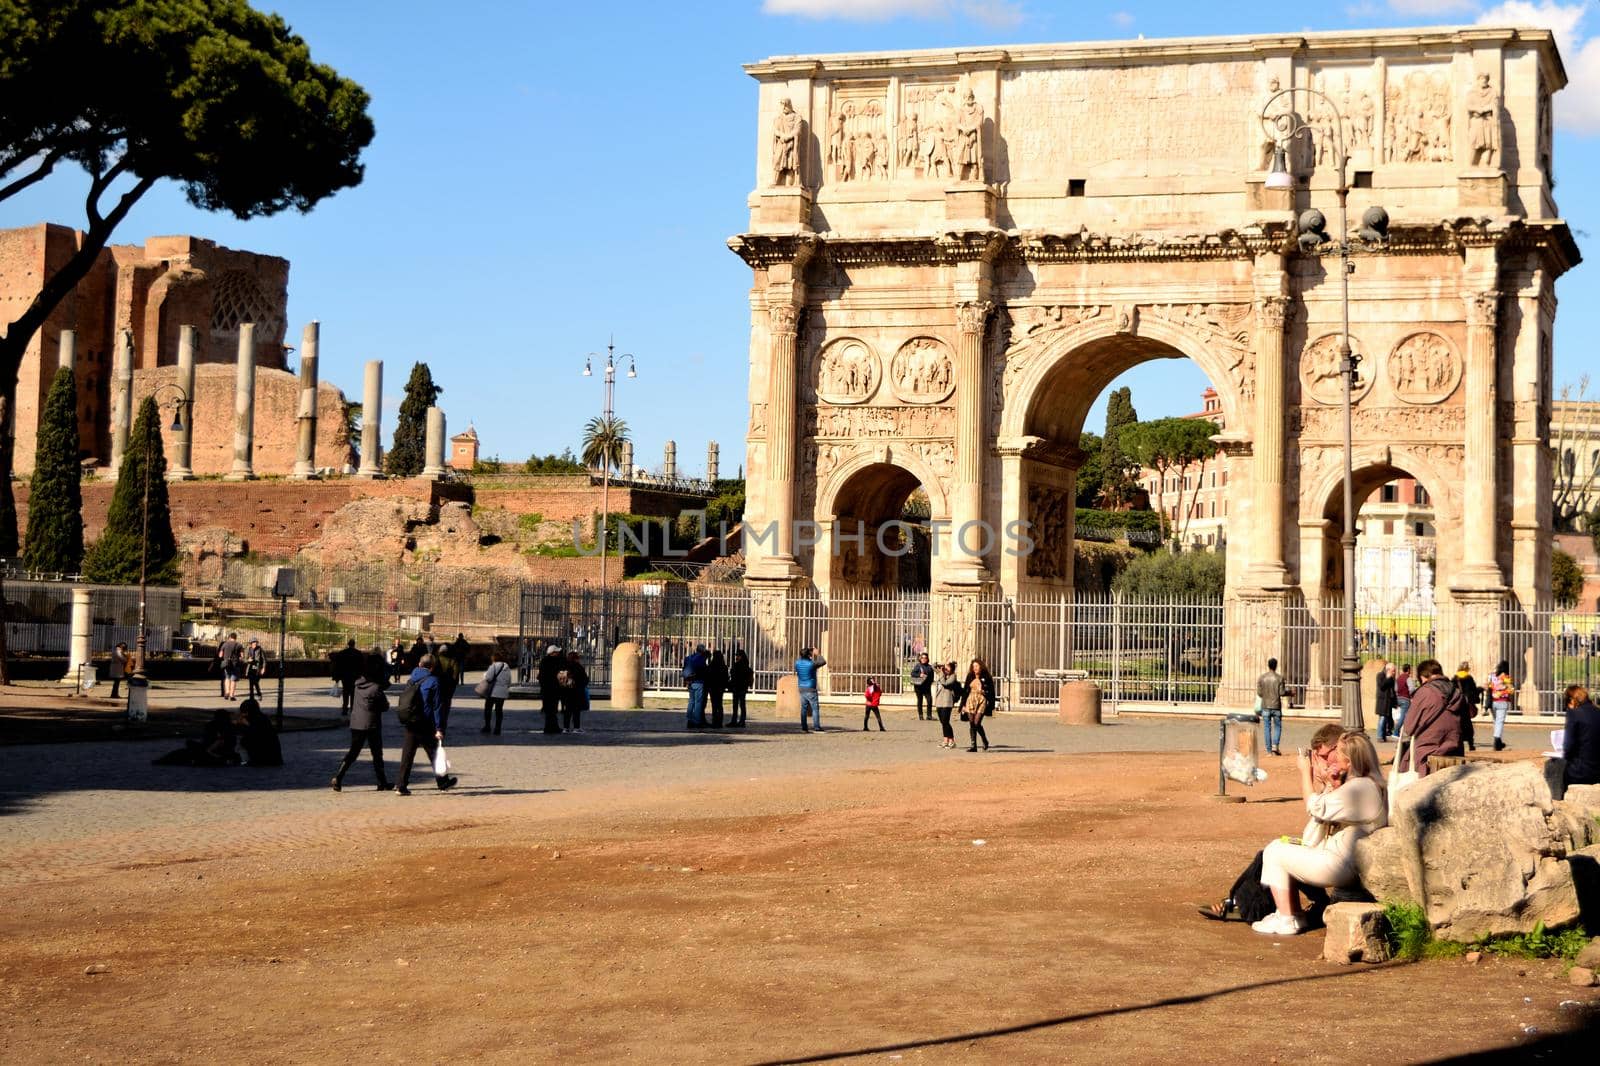 March 8th 2020, Rome, Italy: View of the Arch of Constantine with few tourists due to the coronavirus by silentstock639